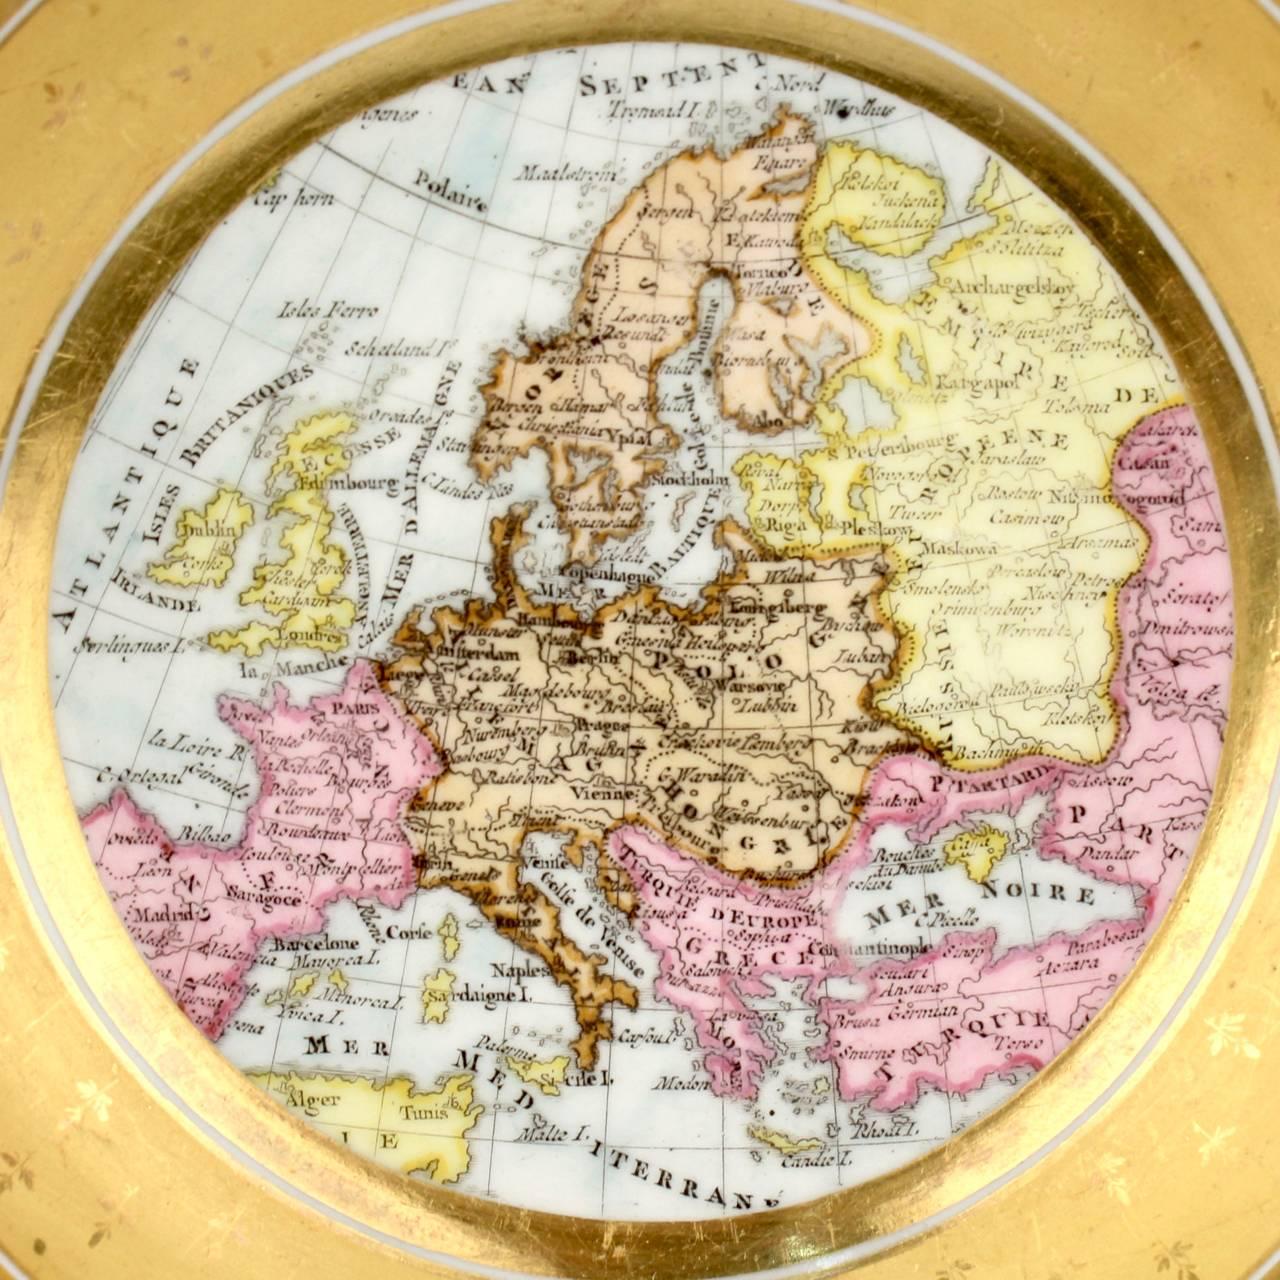 A rare, early 19th century Paris porcelain cartographical saucer. 

The saucer depicts a European map surrounded by a wide gold border.

Measures: Diameter ca. 5 1/8 in.

 

